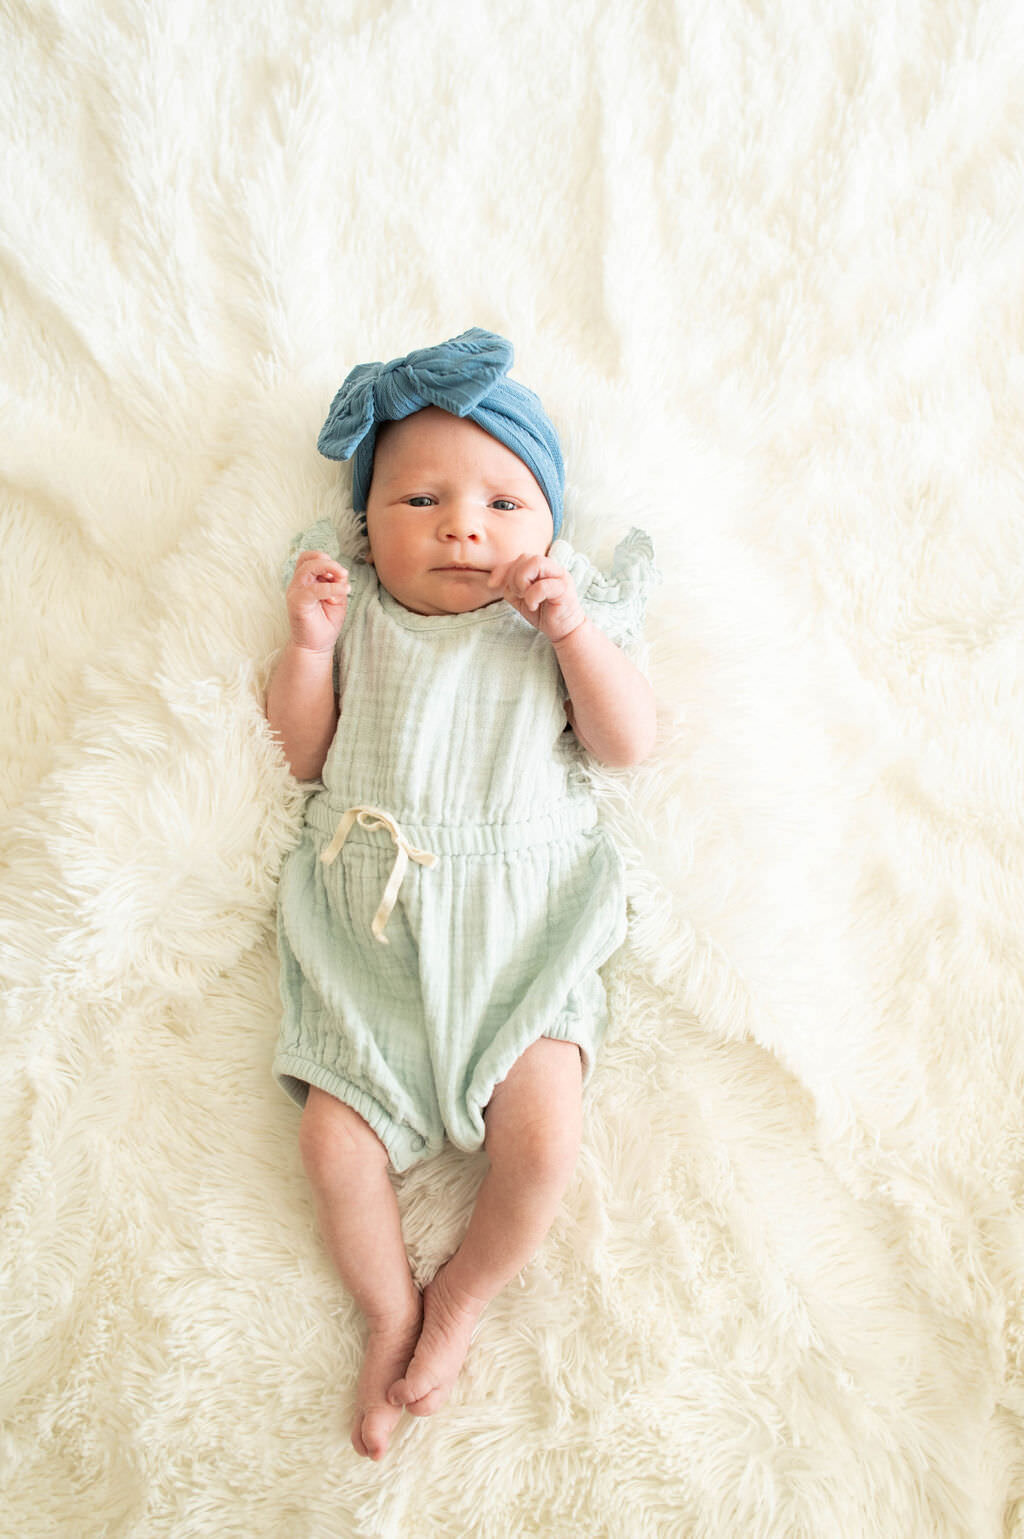 A newborn baby in a blue bow laying on a white blanket.